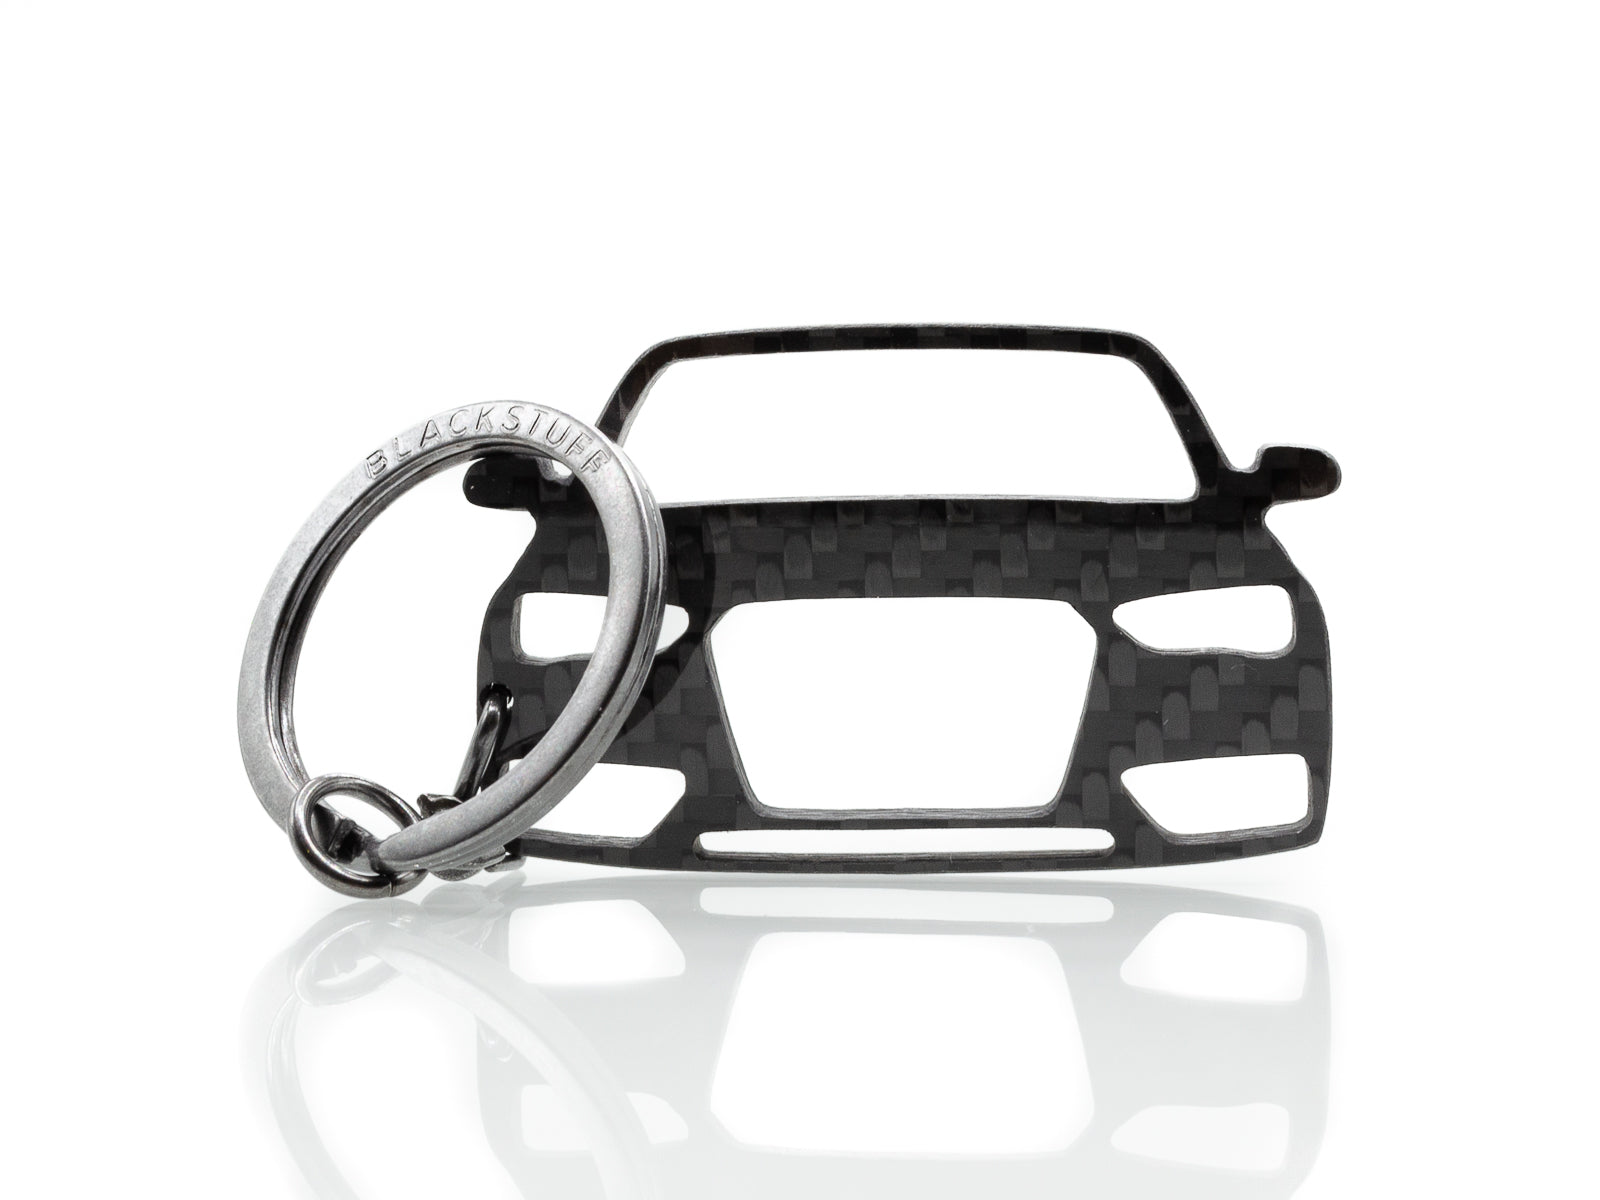 BlackStuff Carbon Fiber Keychain Compatible with A4 B8 facelift 2012 BS-1054